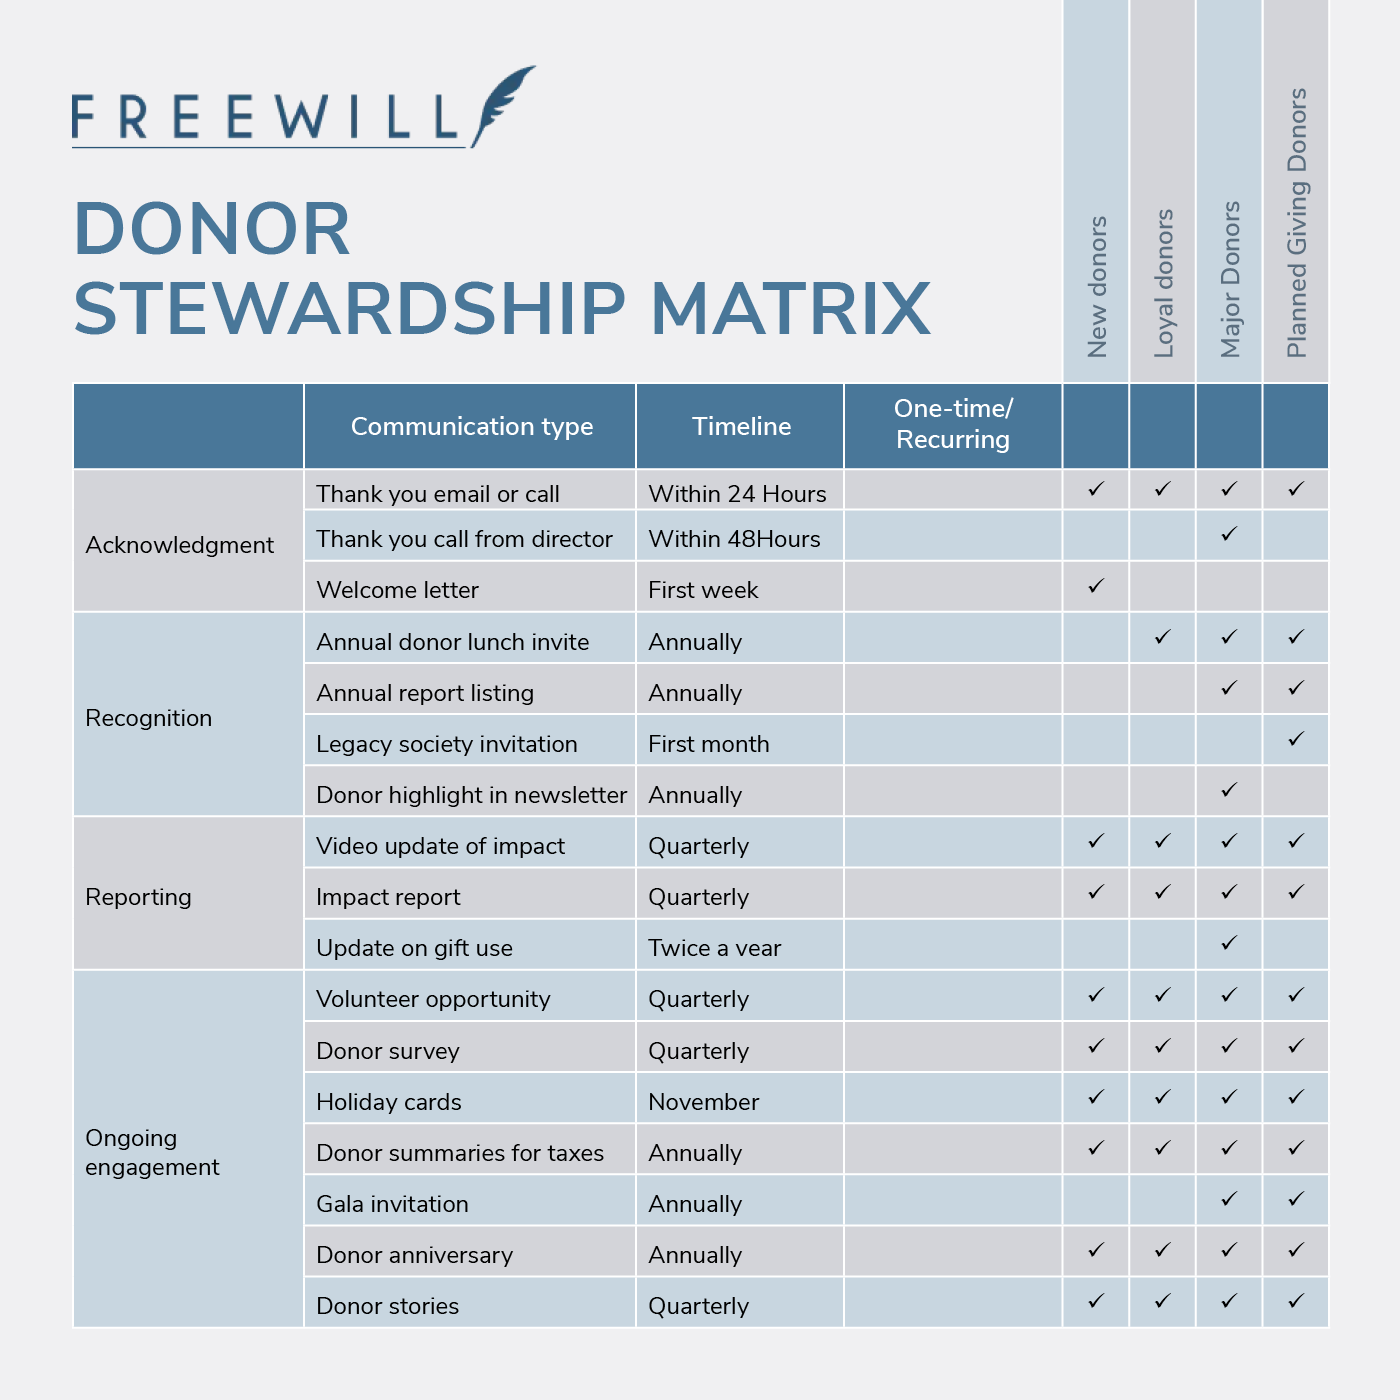 This donor stewardship matrix template shows how to list the different types of donor outreach and lay out a plan for when each should be used for different donor segments.